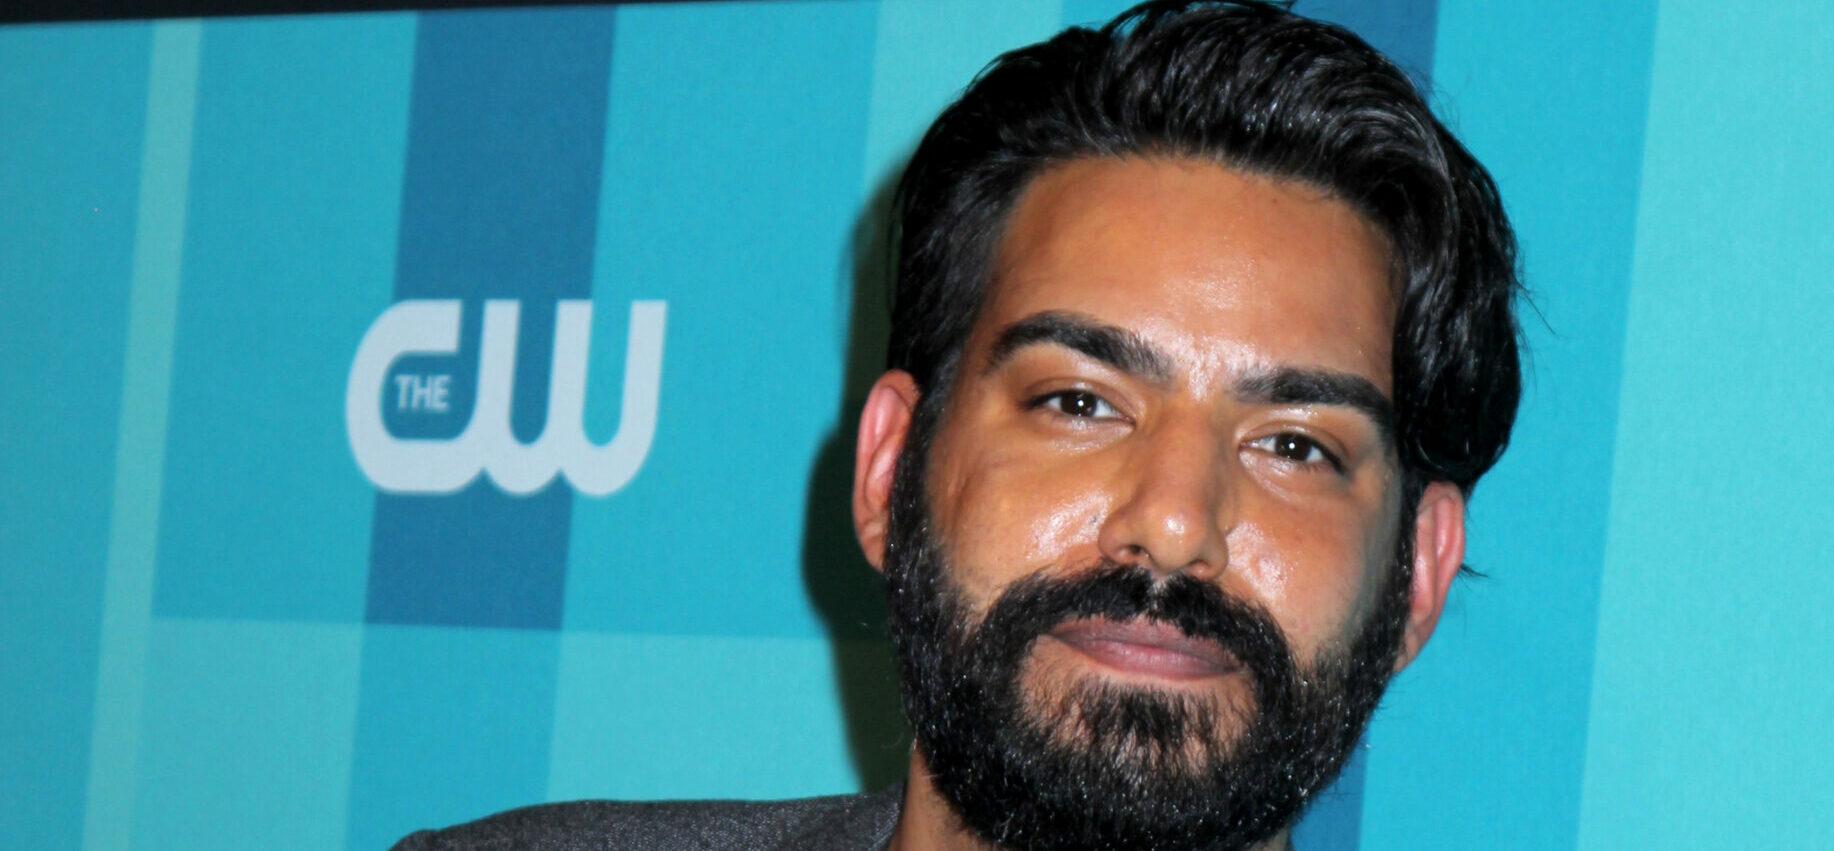 Fans Want Rahul Kohli In The 'Stars Wars' Franchise After This Tweet